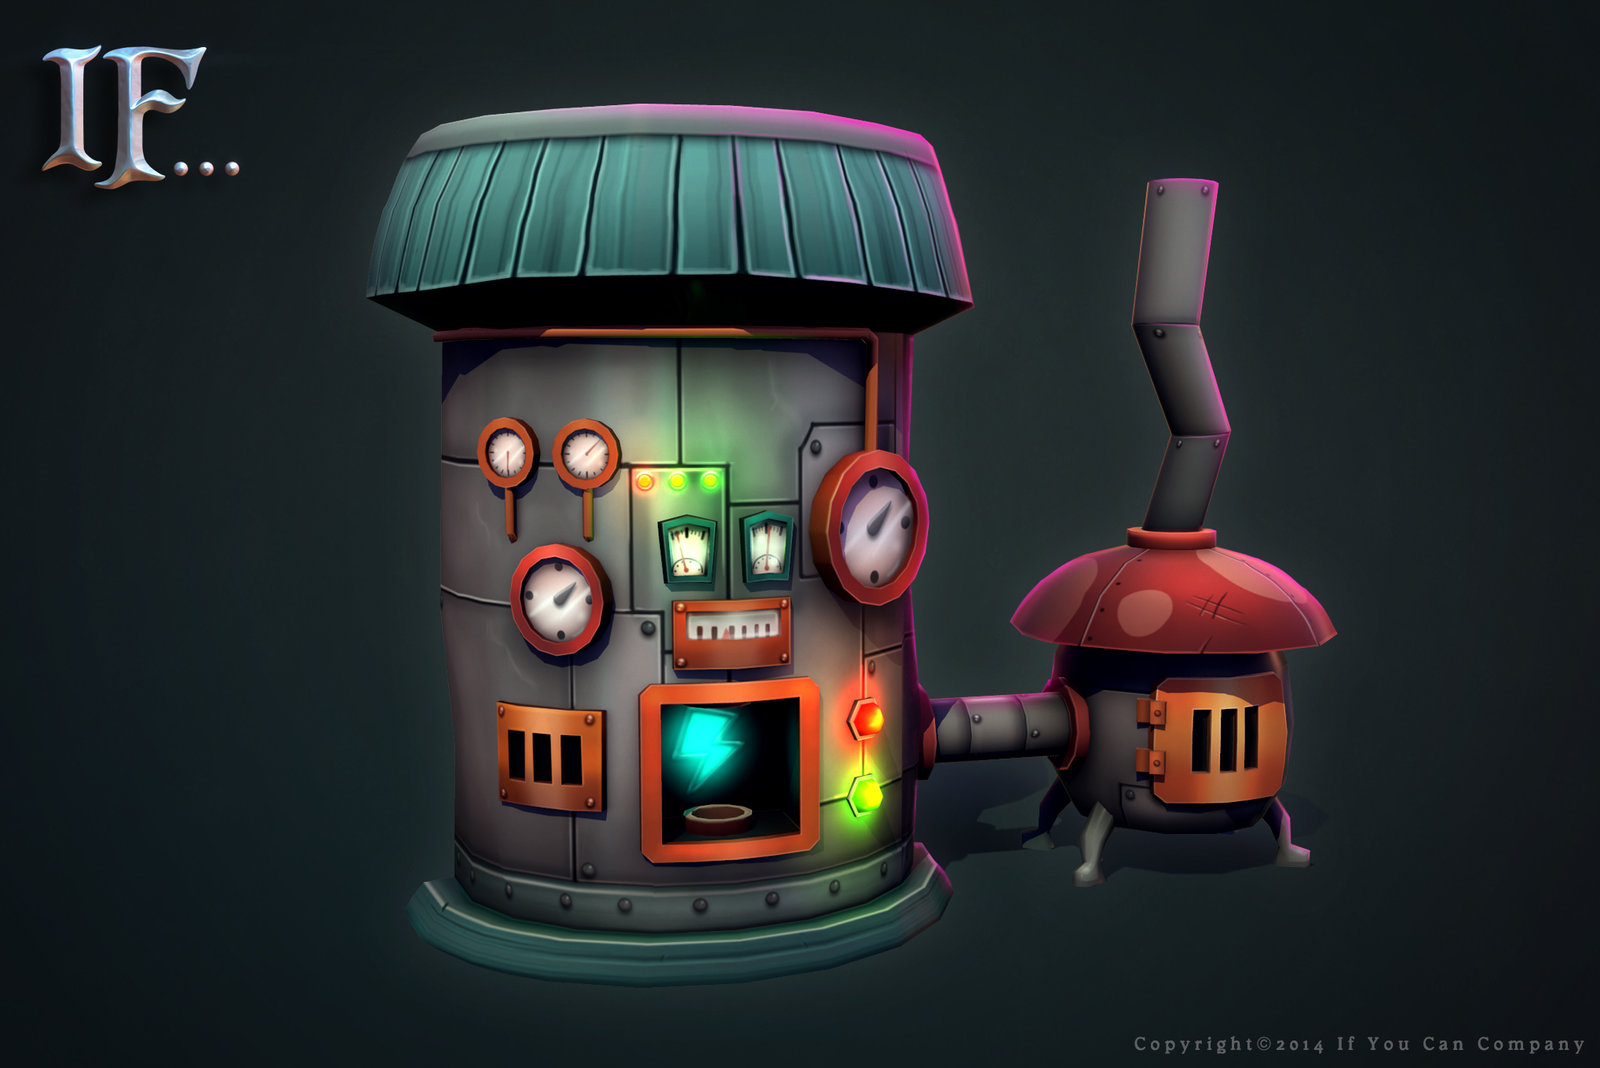 Imago ovens. Modeled and textured by me.